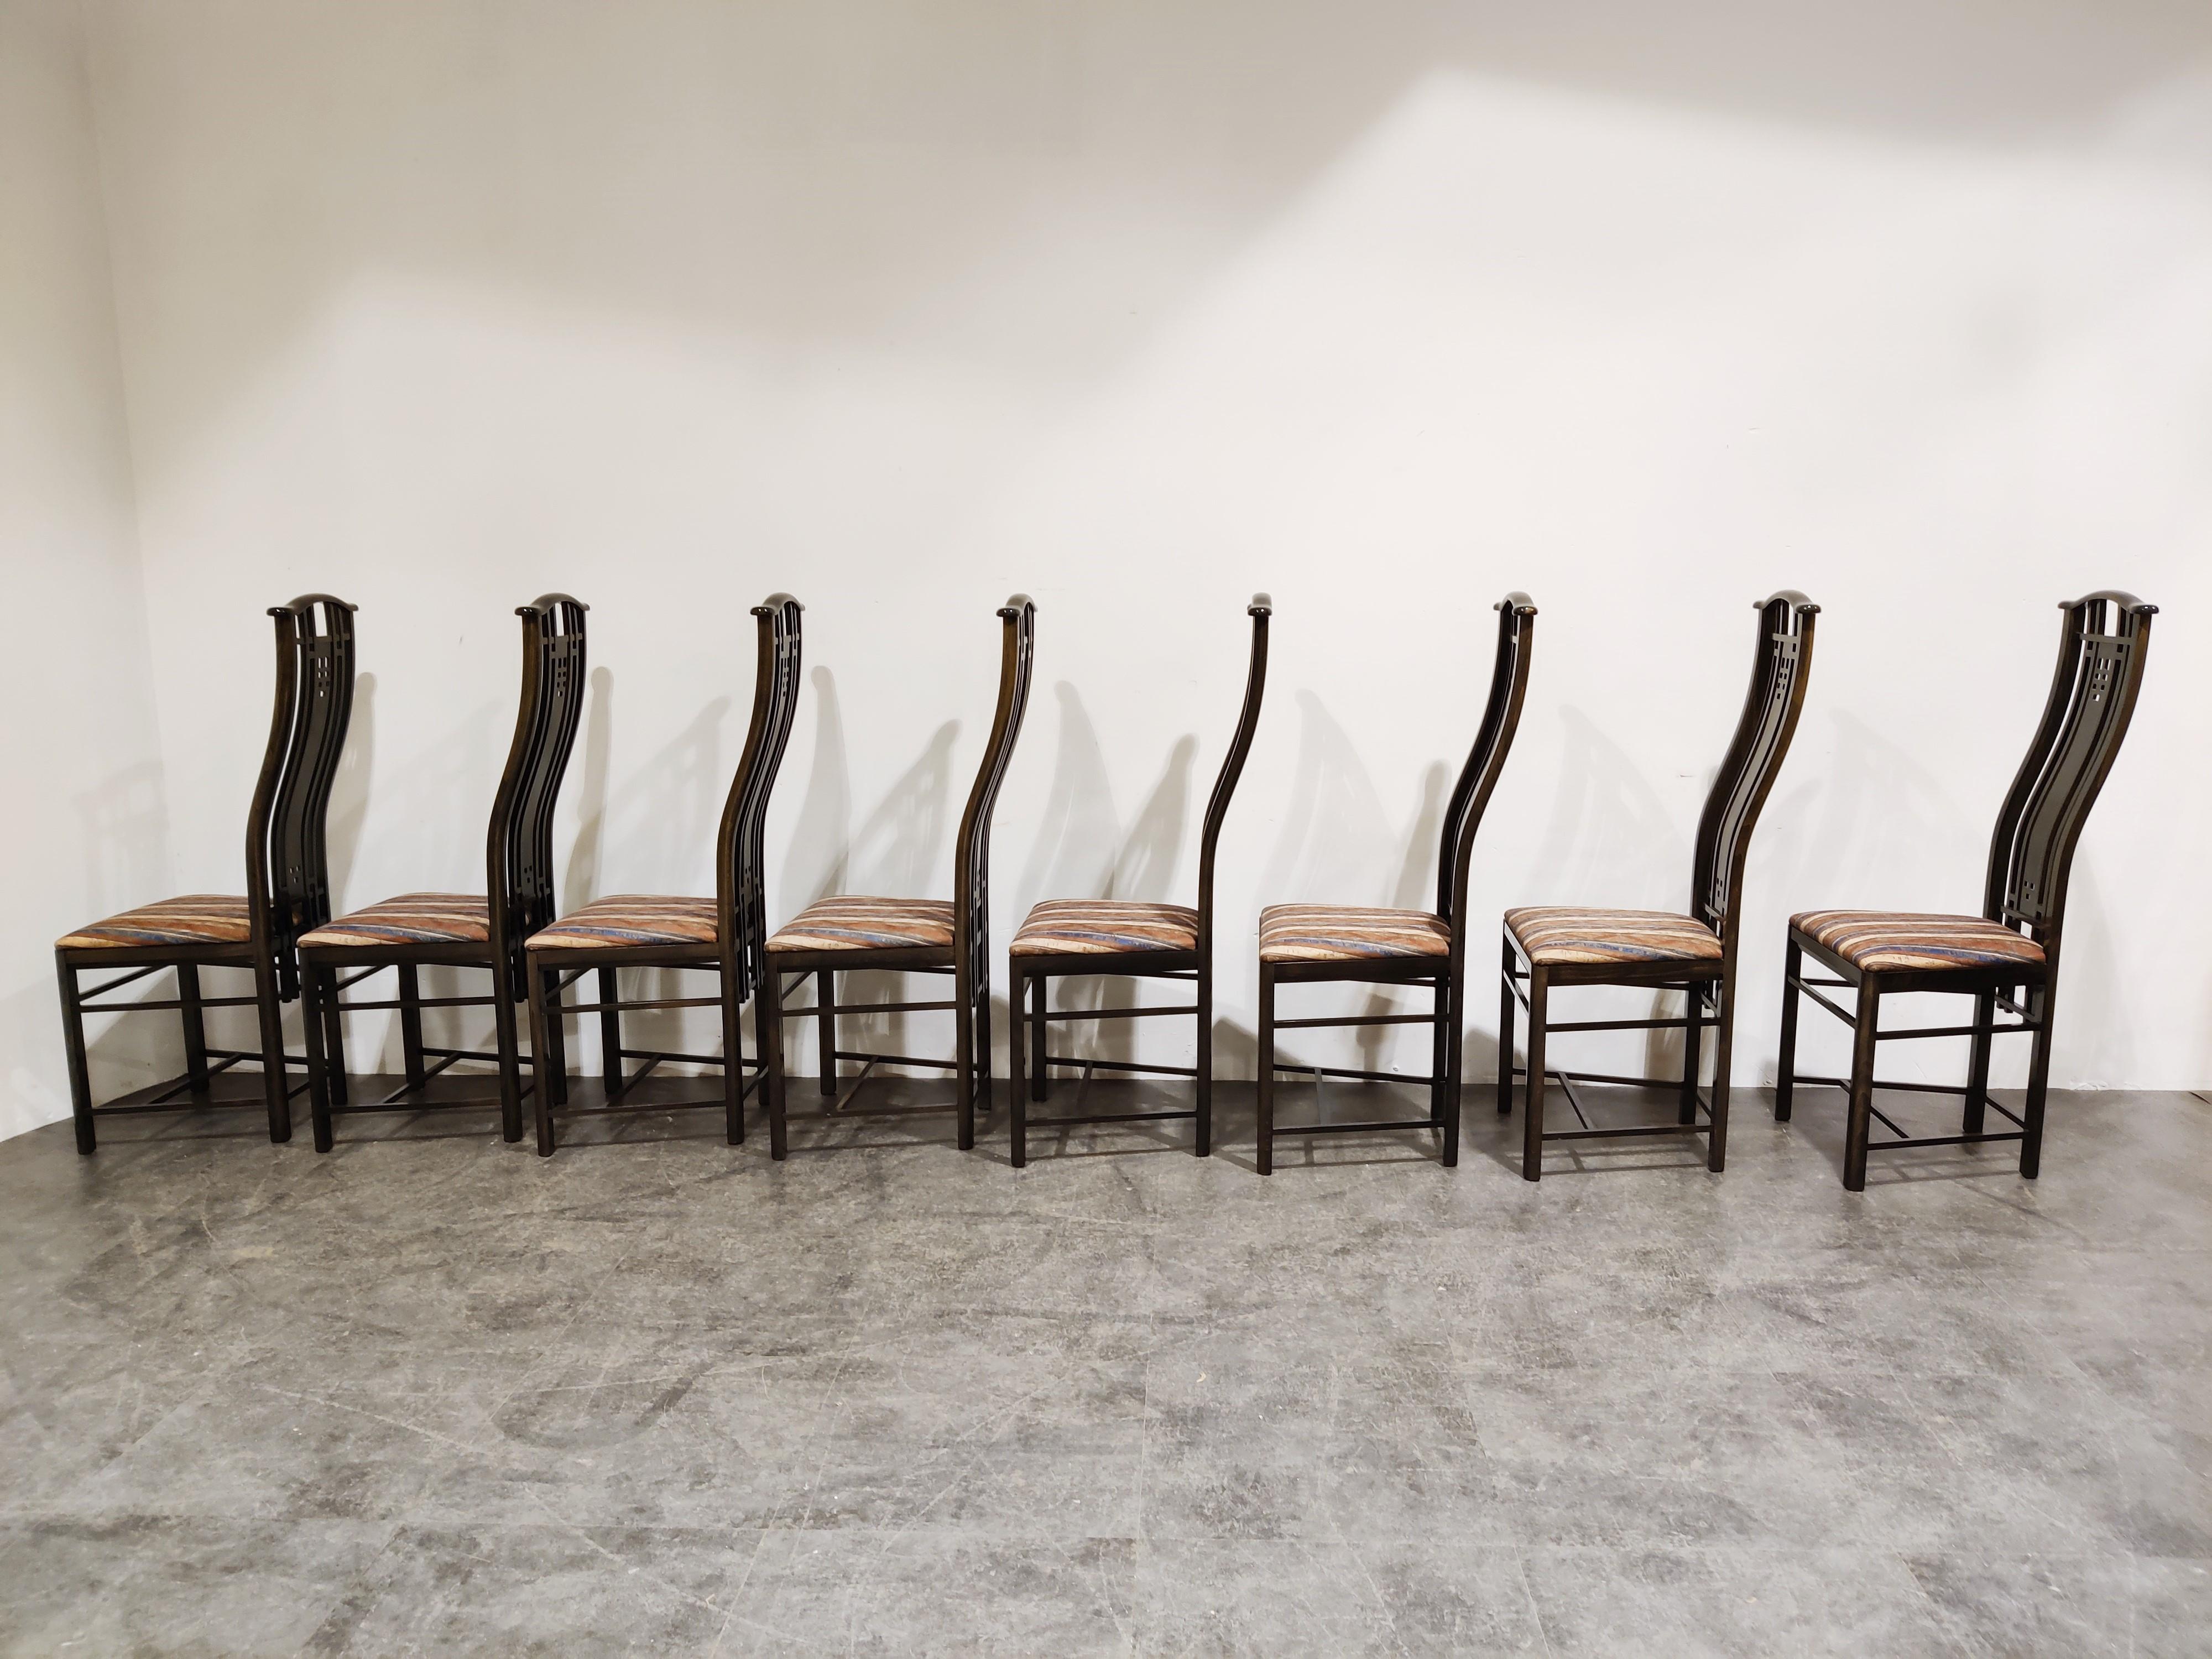 Late 20th Century Dining Chairs Umberto Asnago for Giorgetti, 1980s For Sale